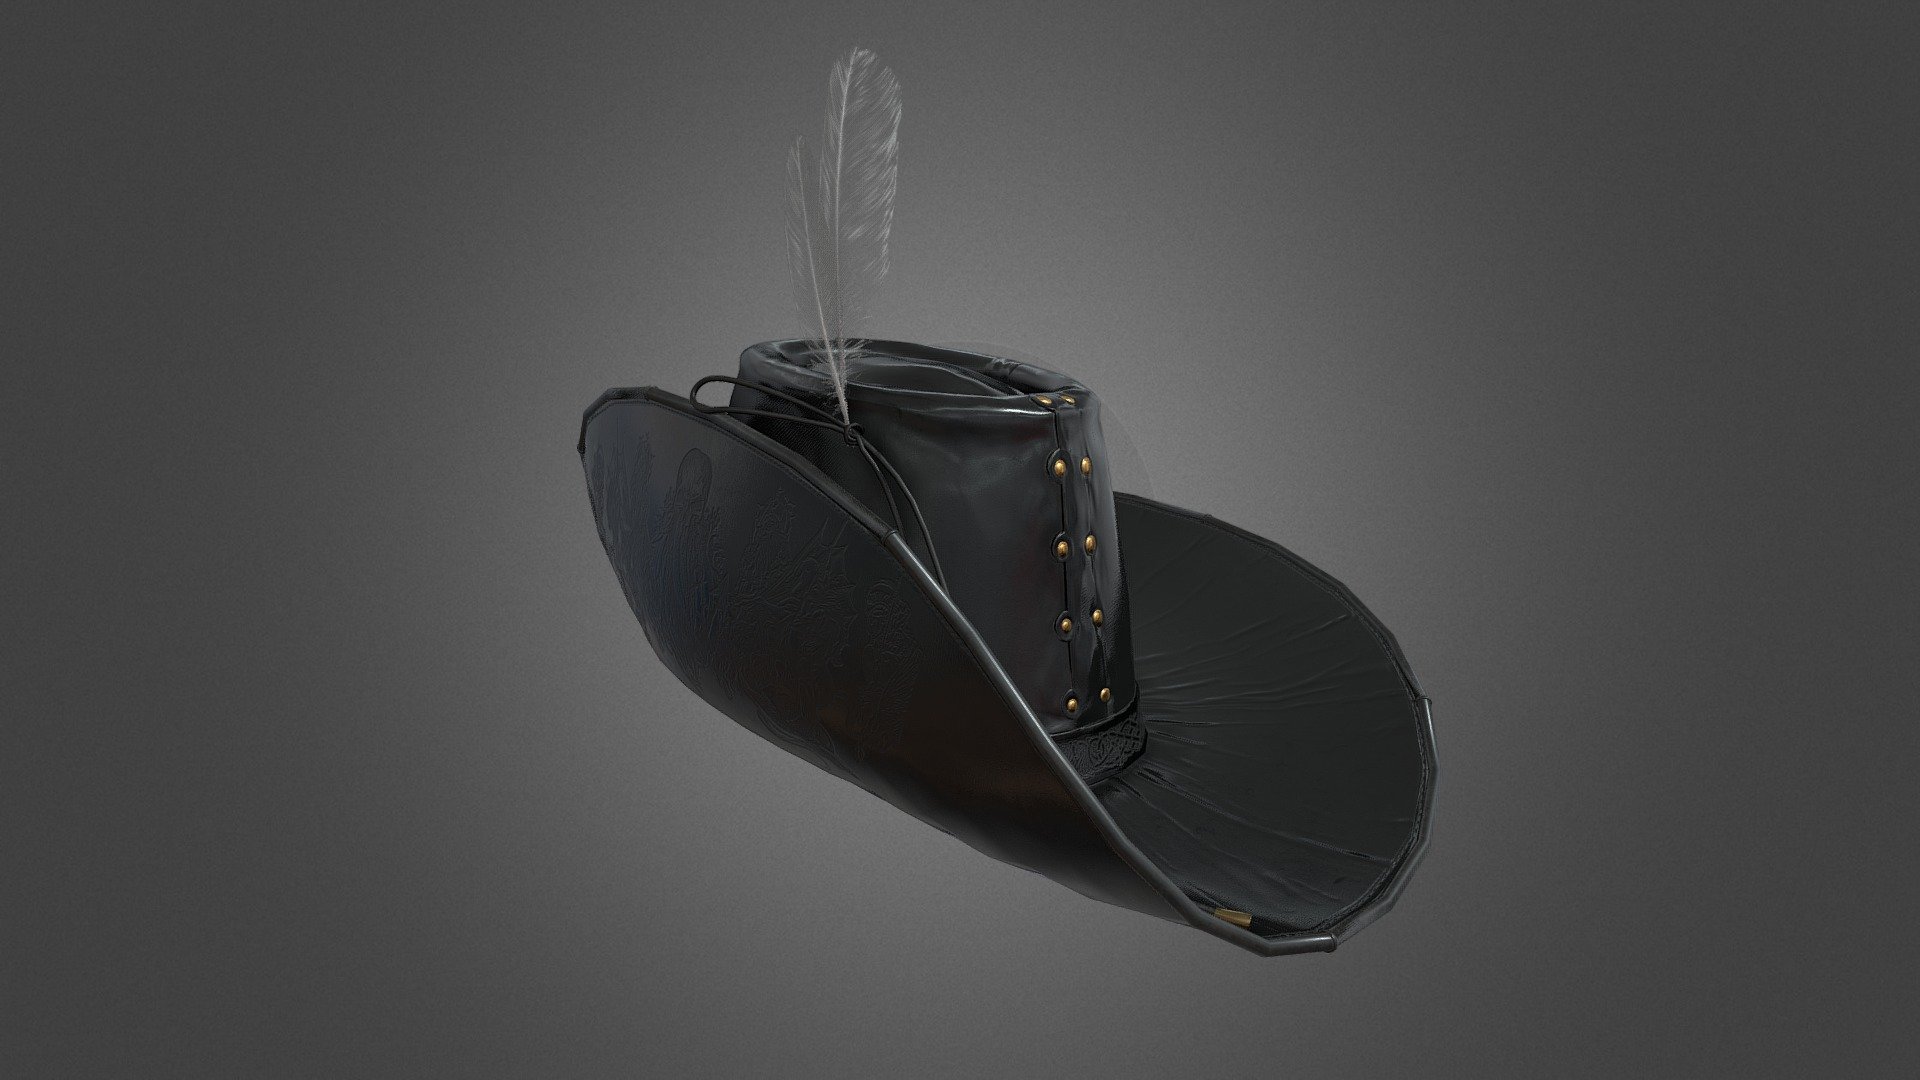 High Detailed Photorealistic Pirate Hat made with blender and rendered by Cycles .
This model has a clean geometry based on loops &lsquo;only' quads . Made with blender for cycles 
This hat is low poly and ready for games and any 3d projects .
(Ready to render exactly as you see above)

Hats,Feathers,Hat Straps are modeled separately.

Textures
they have two UVs Set for better quality ( body and others ) in PNG format
Resolution of all textures are 4K

polys : 4271
verts : 4456

we worked on this project with love - Pirate Hat 3 - 3D model by bridge_studio 3d model